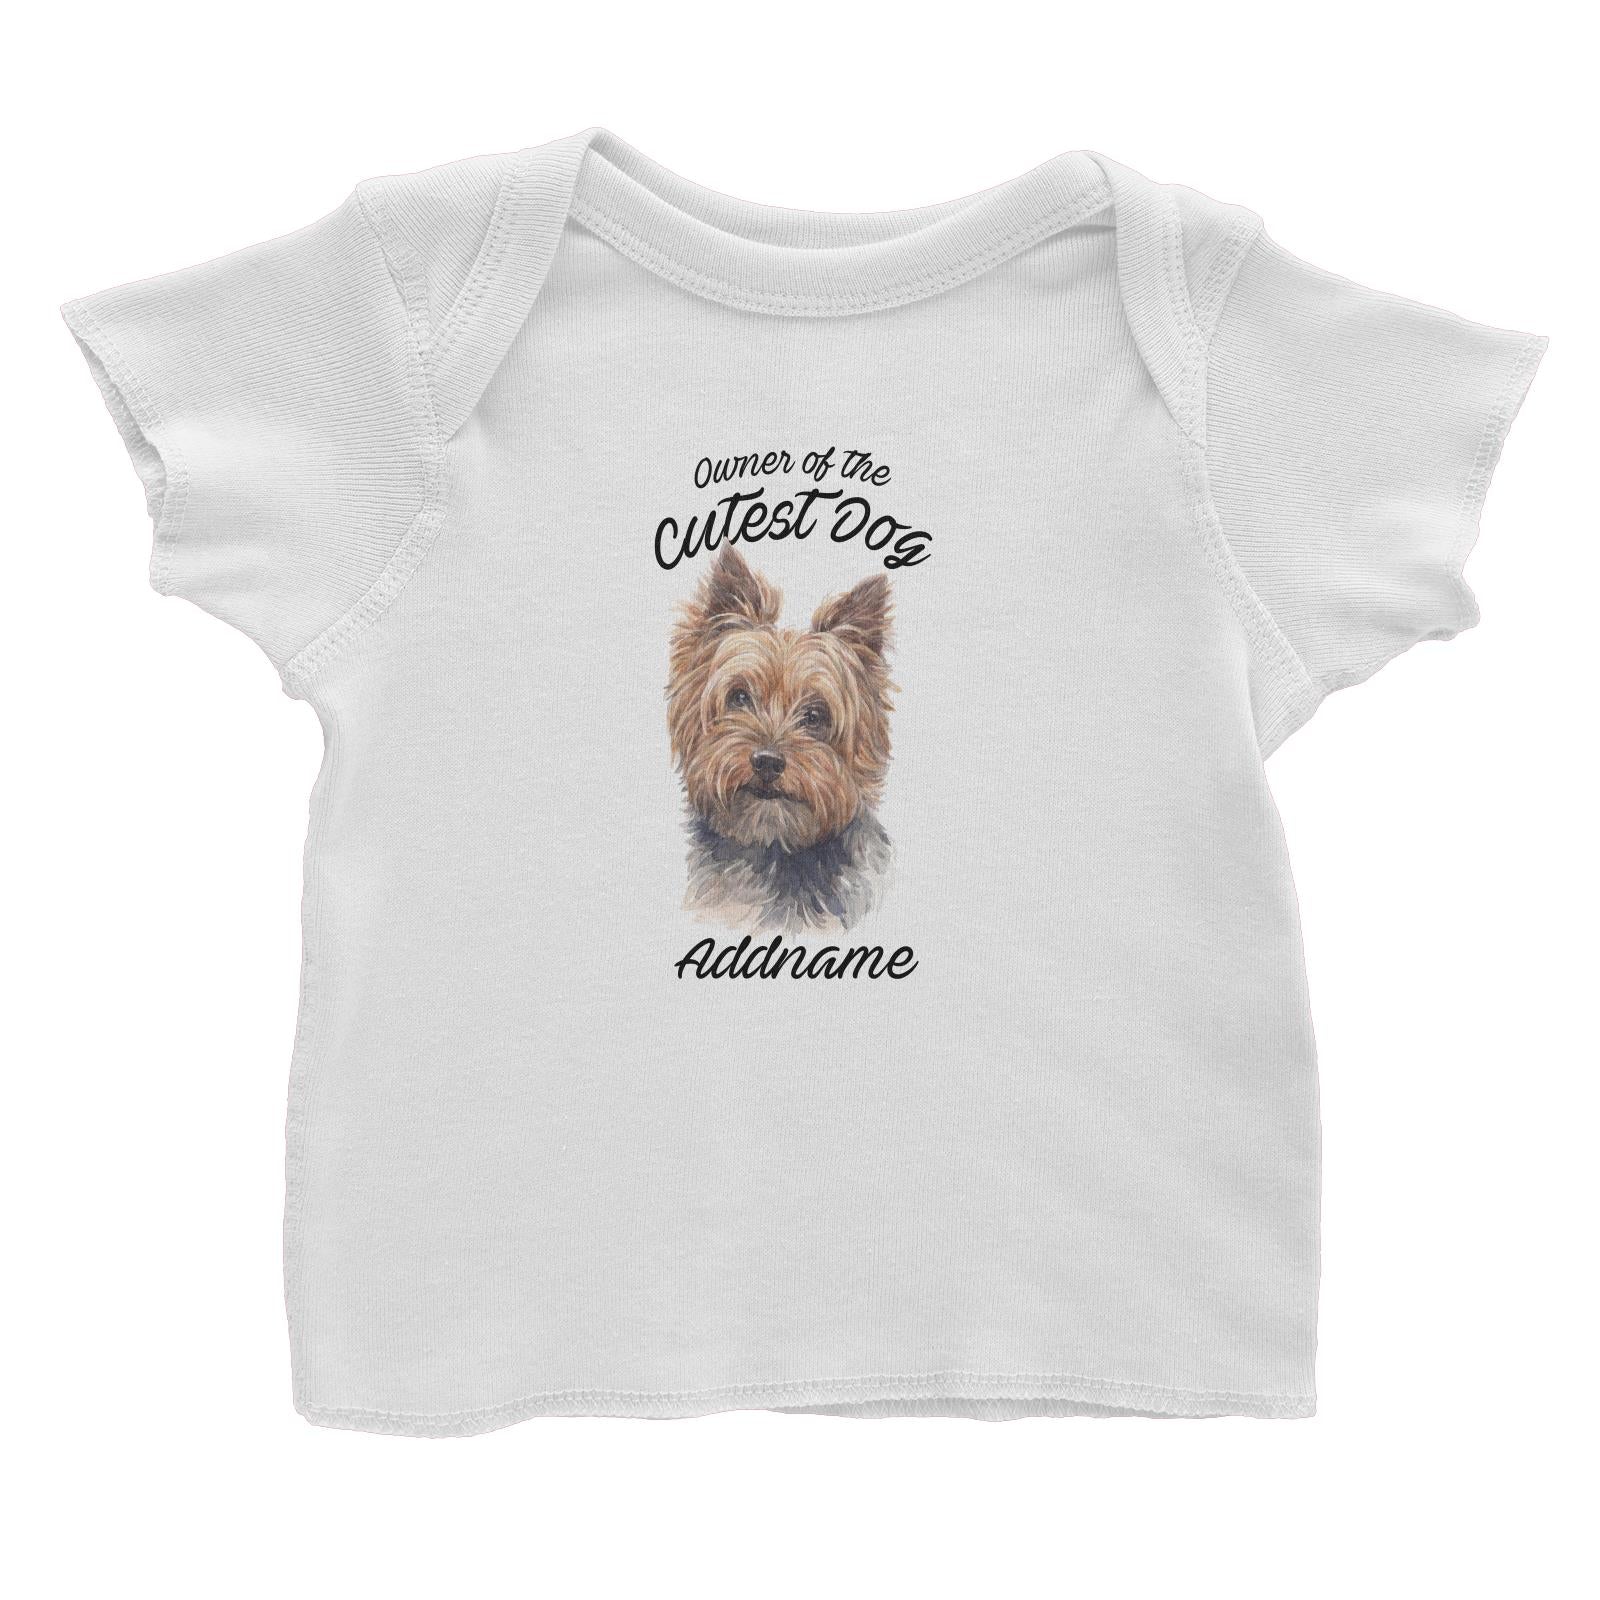 Watercolor Dog Owner Of The Cutest Dog Yorkshire Terrier Addname Baby T-Shirt